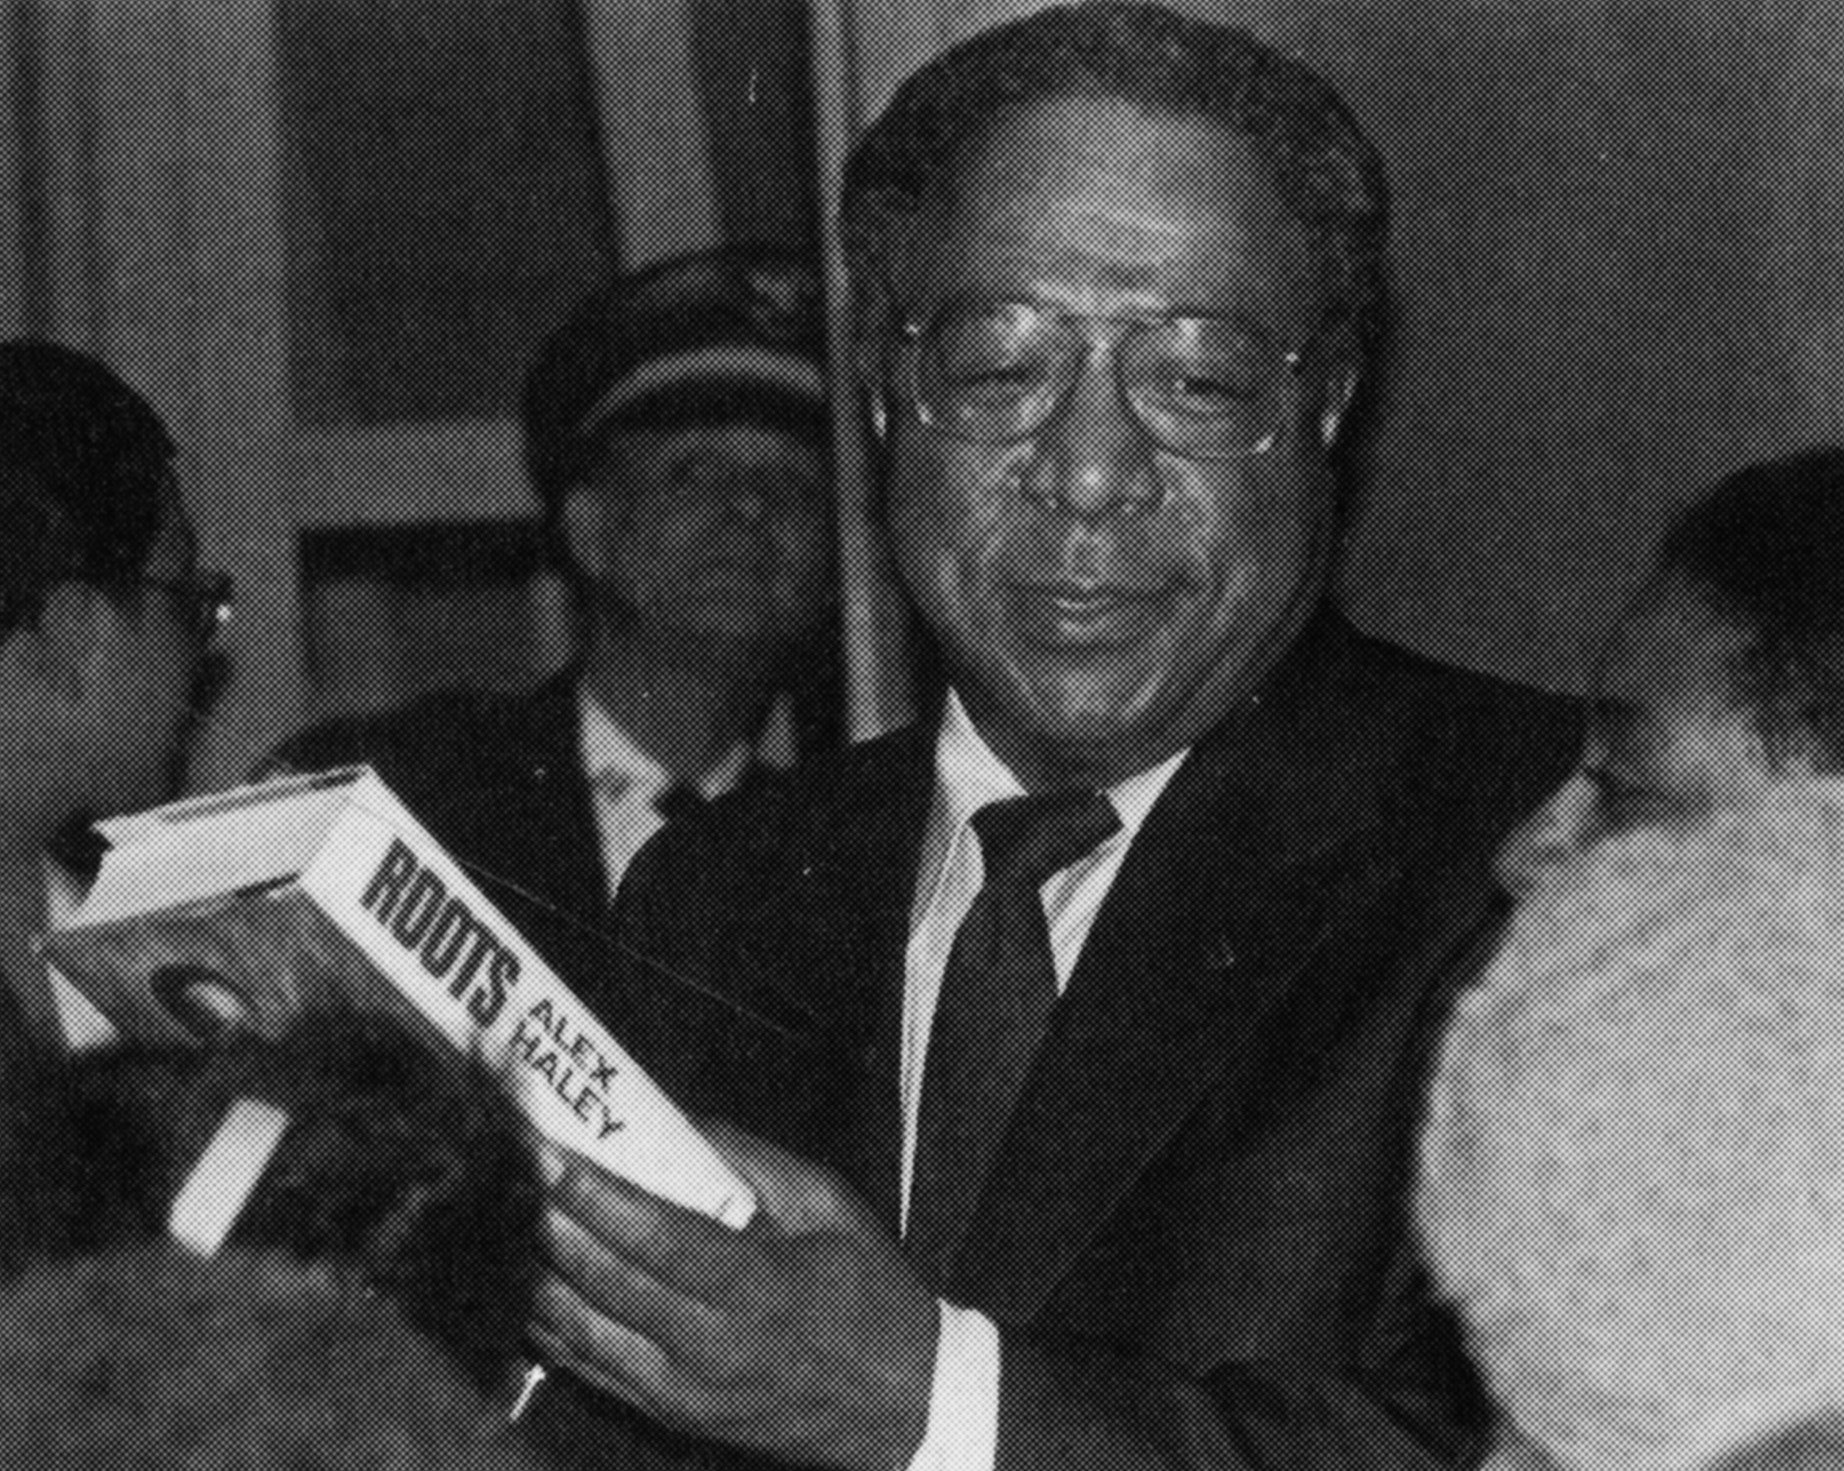 Alex Haley speaking at University of Texas at Arlington's Texas Hall in 1980. | Photo: University of Texas at Arlington Photograph Collection, CC BY 4.0, Wikimedia Commons Images